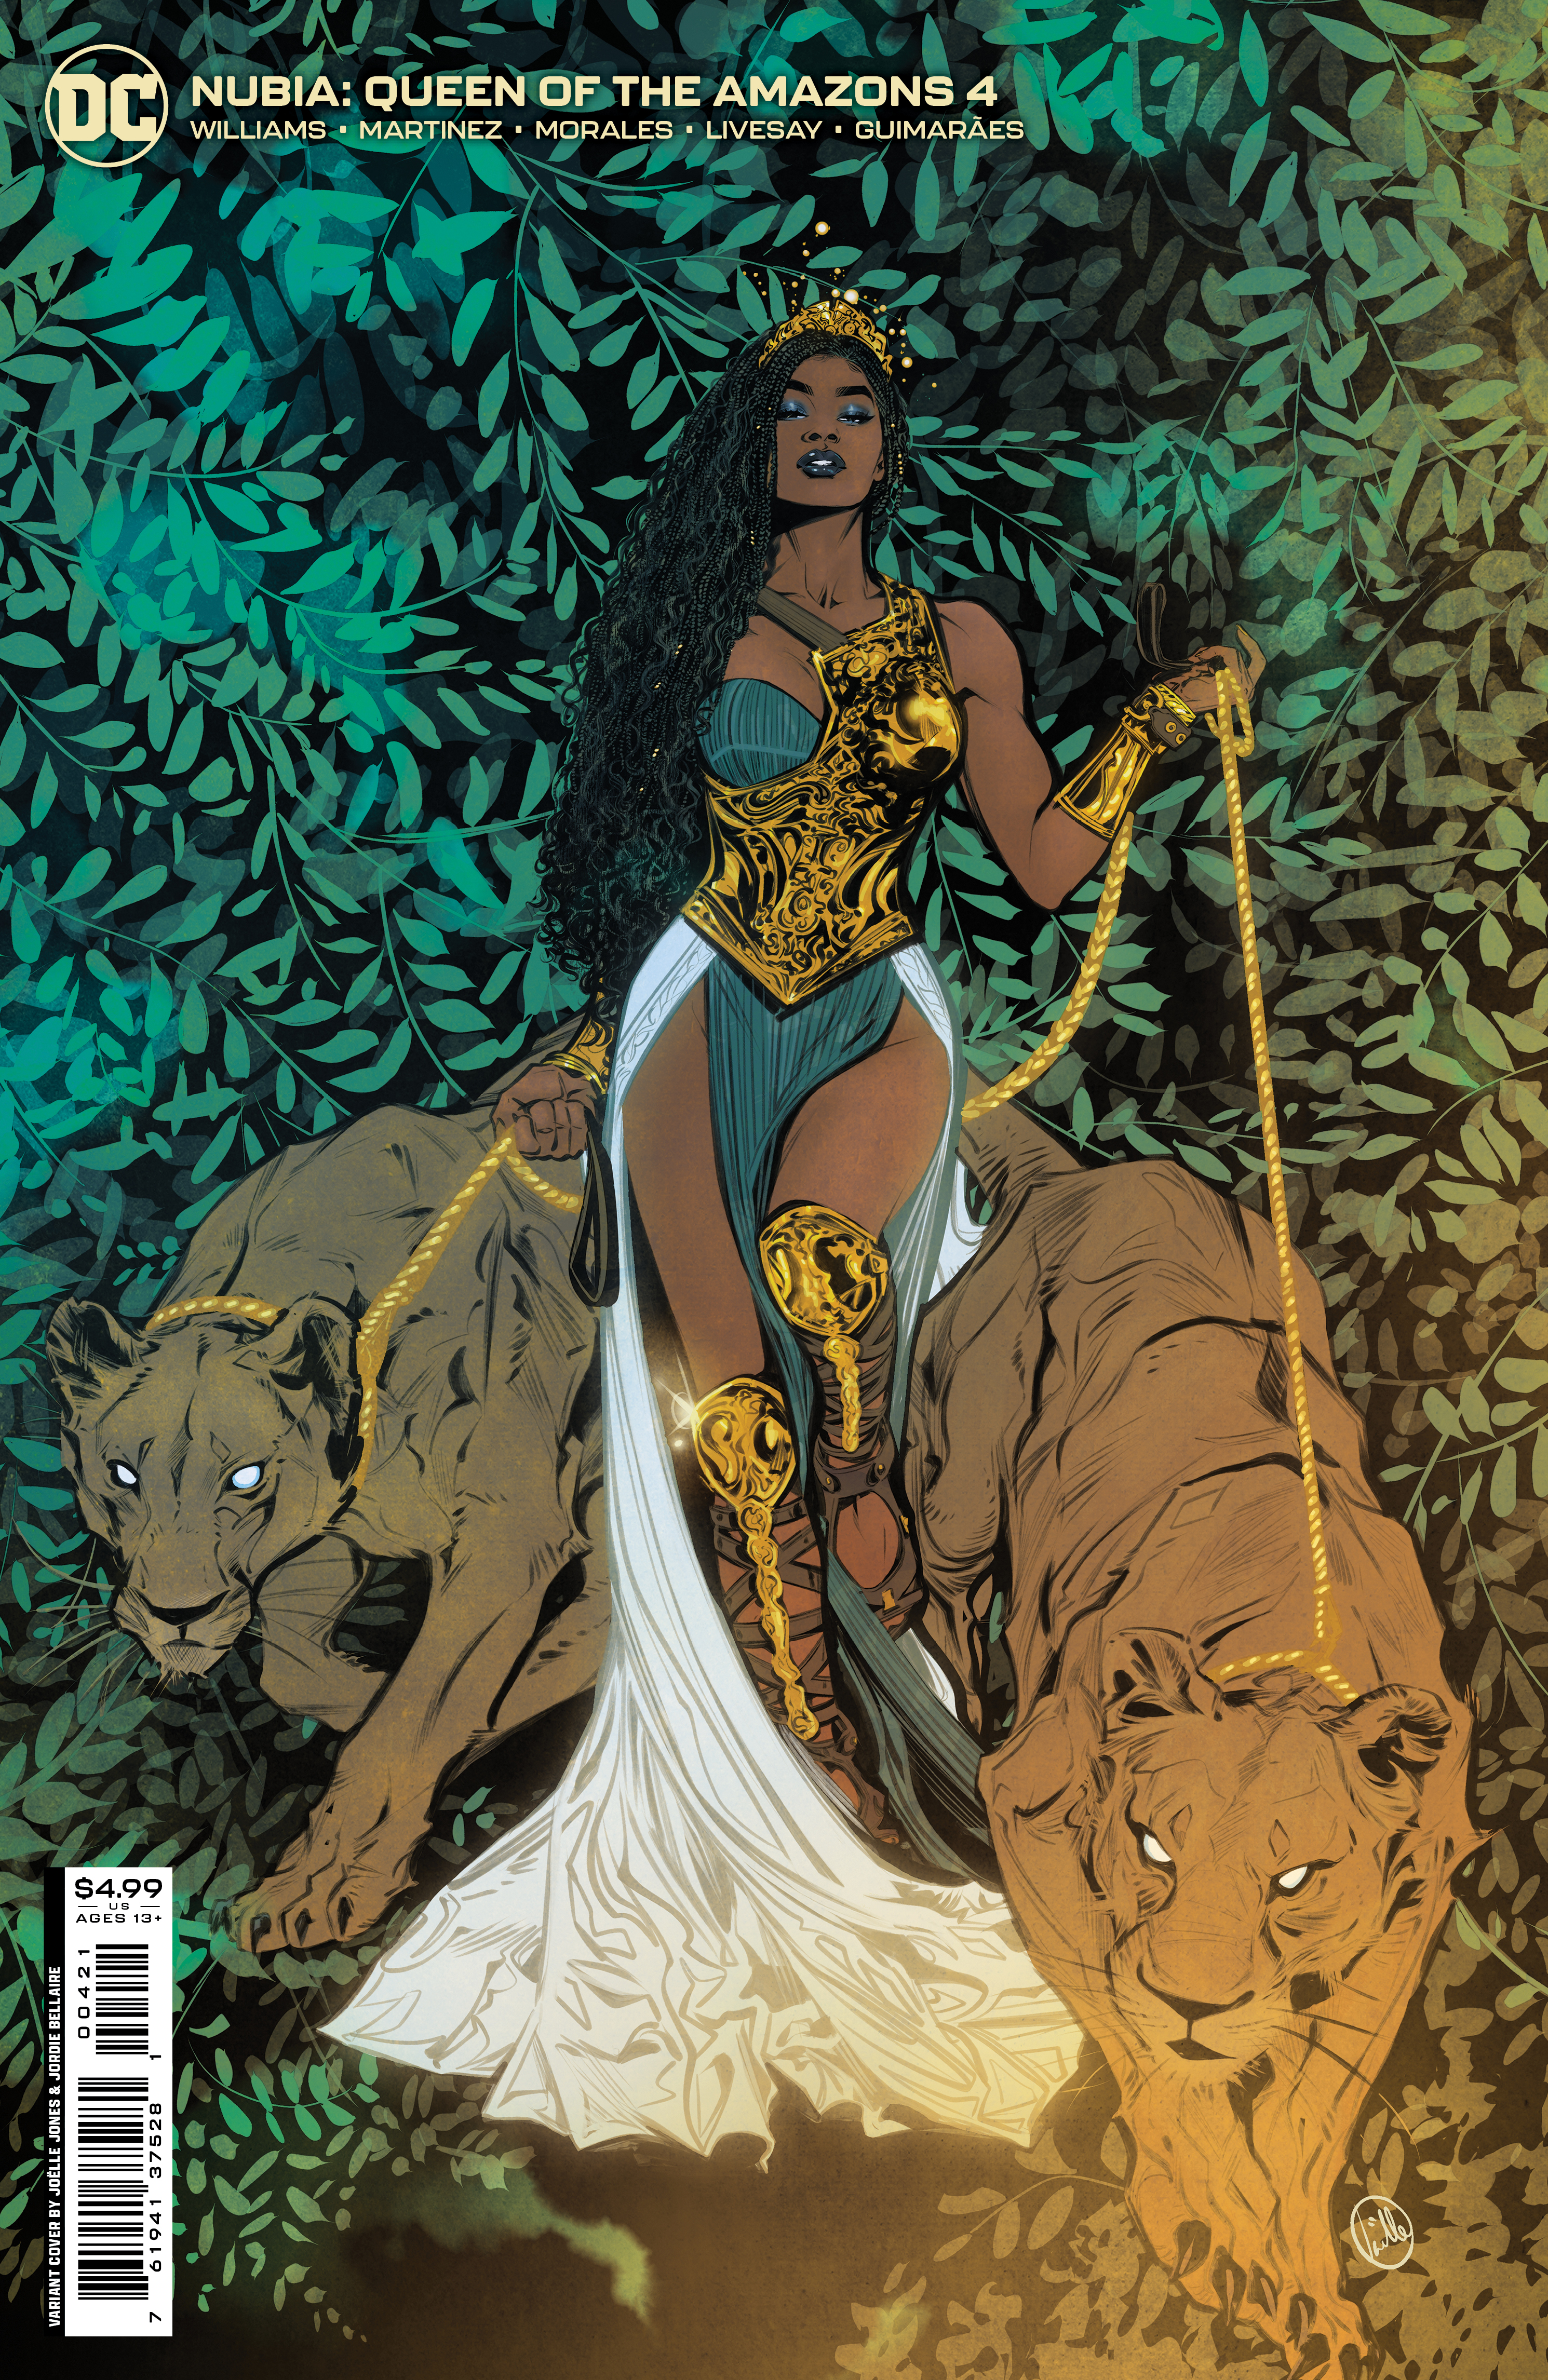 Nubia Queen of the Amazons #4 Cover B Joelle Jones Card Stock Variant (Of 4)